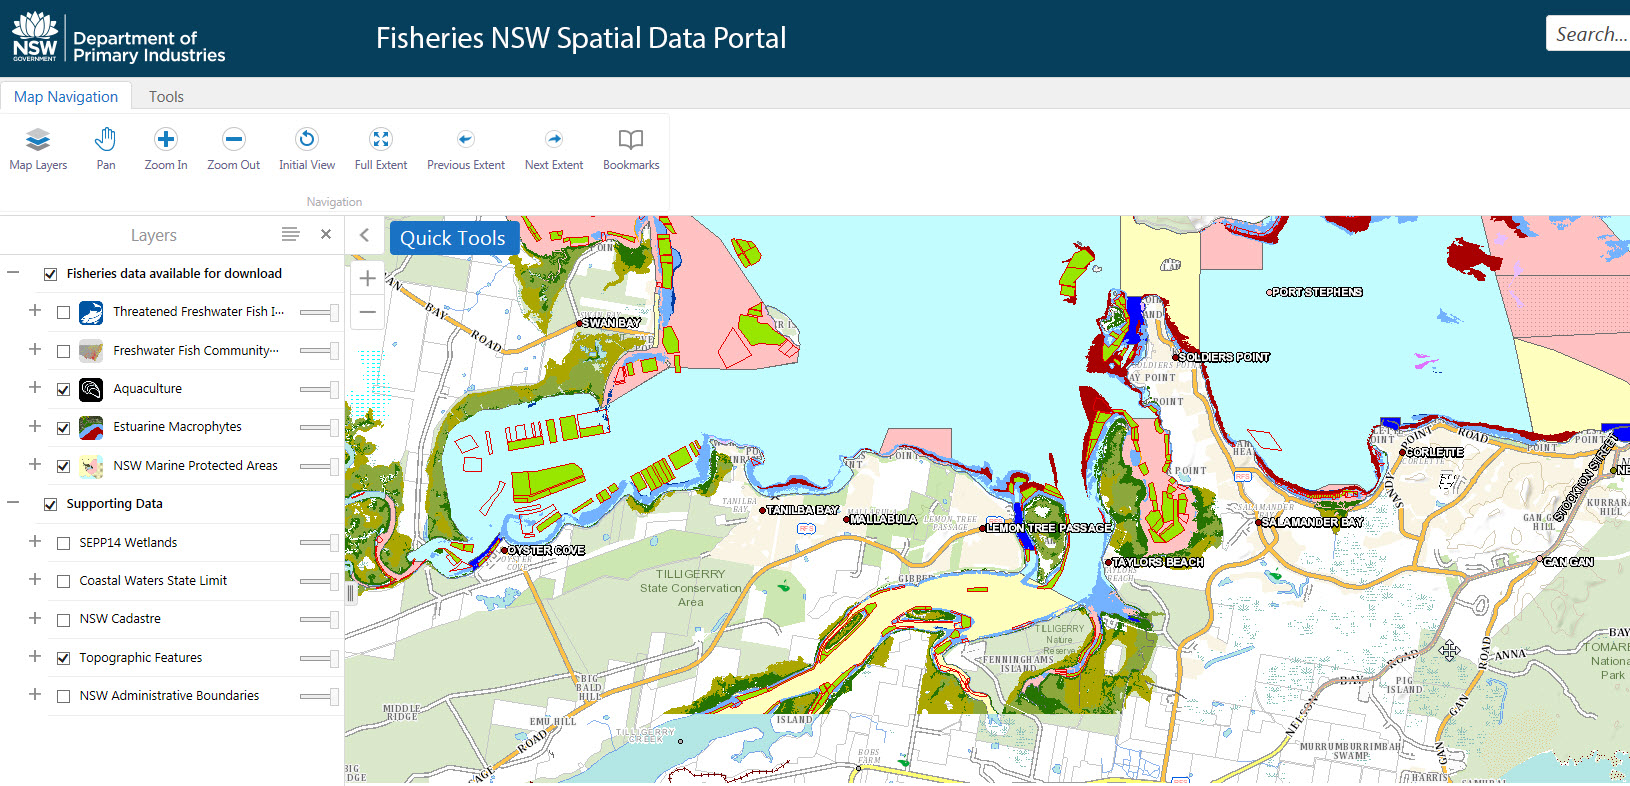 Map view of the Fisheries NSW Spatial Data Portal